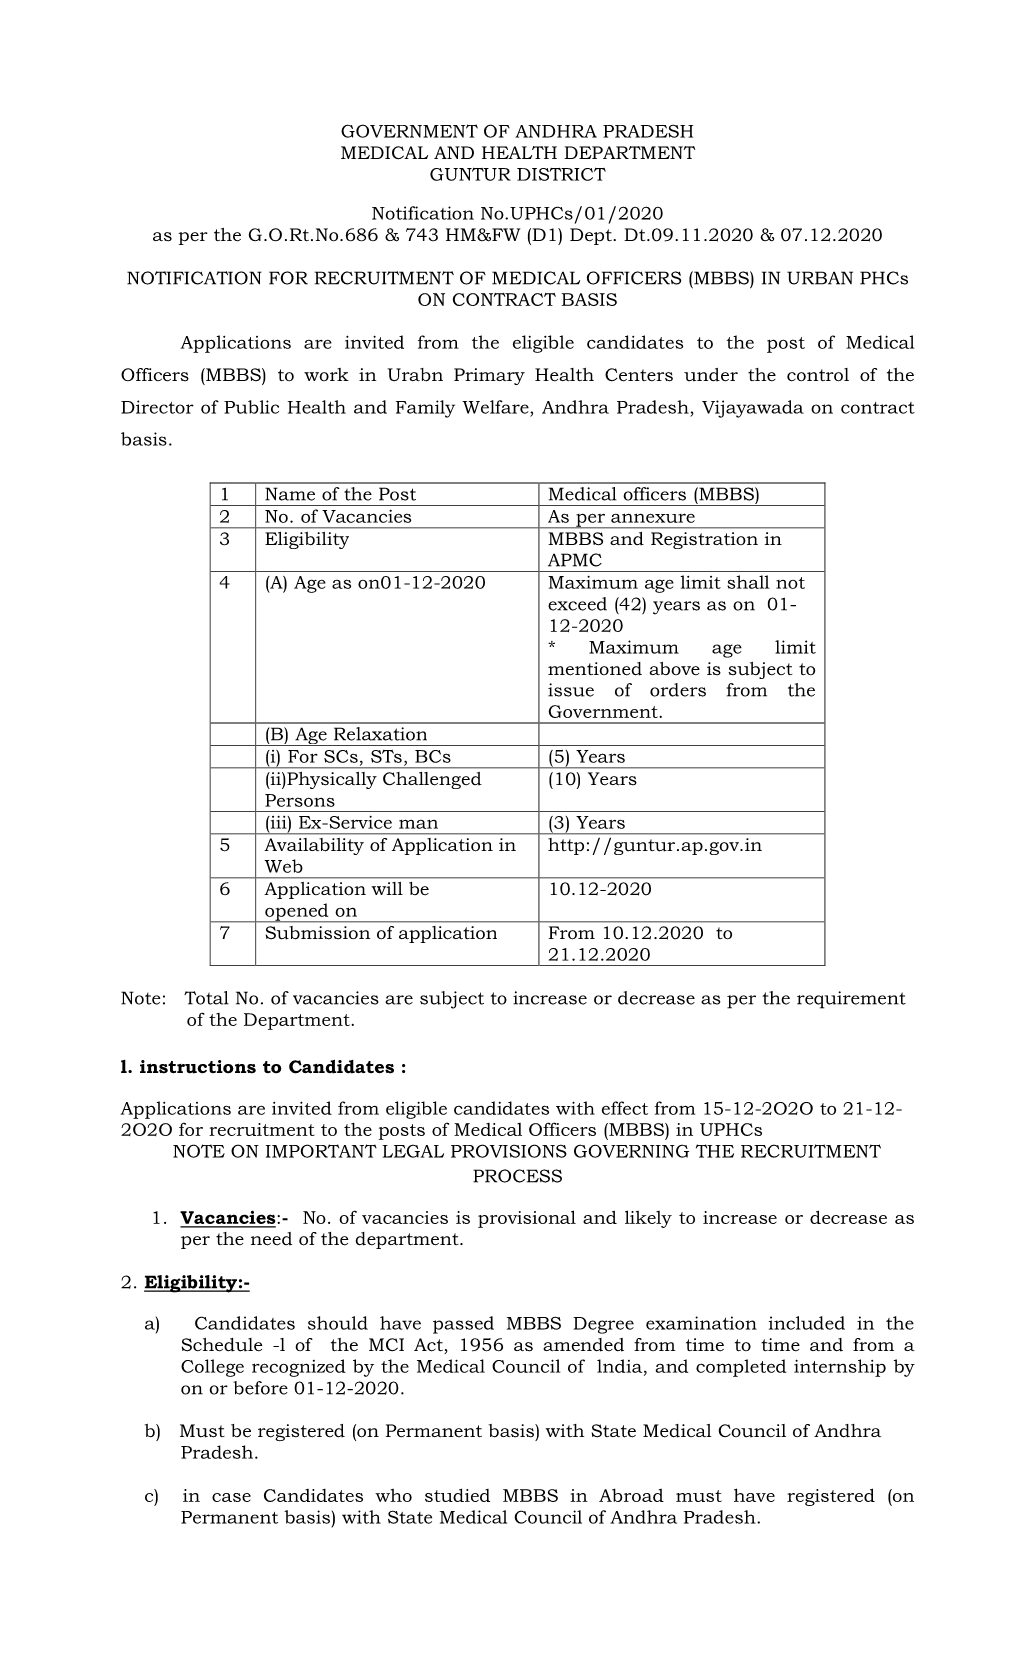 Notification No.Uphcs/01/2020 As Per the G.O.Rt.No.686 & 743 HM&FW (D1) Dept